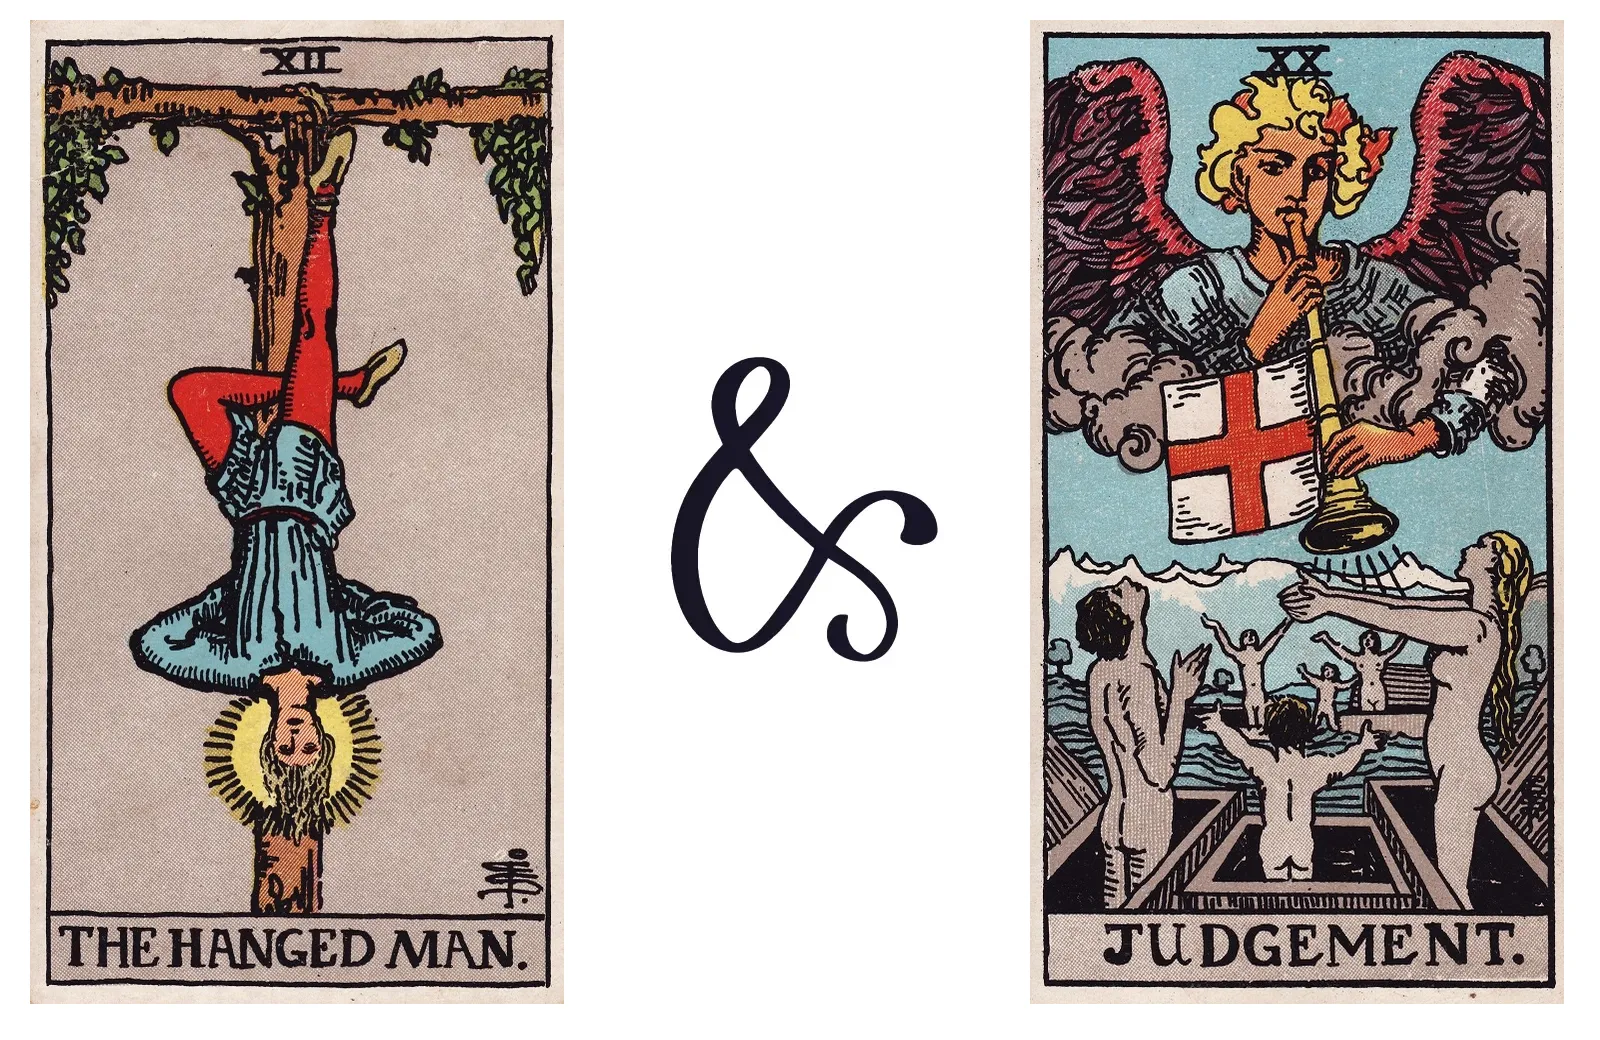 The Hanged Man and Judgement